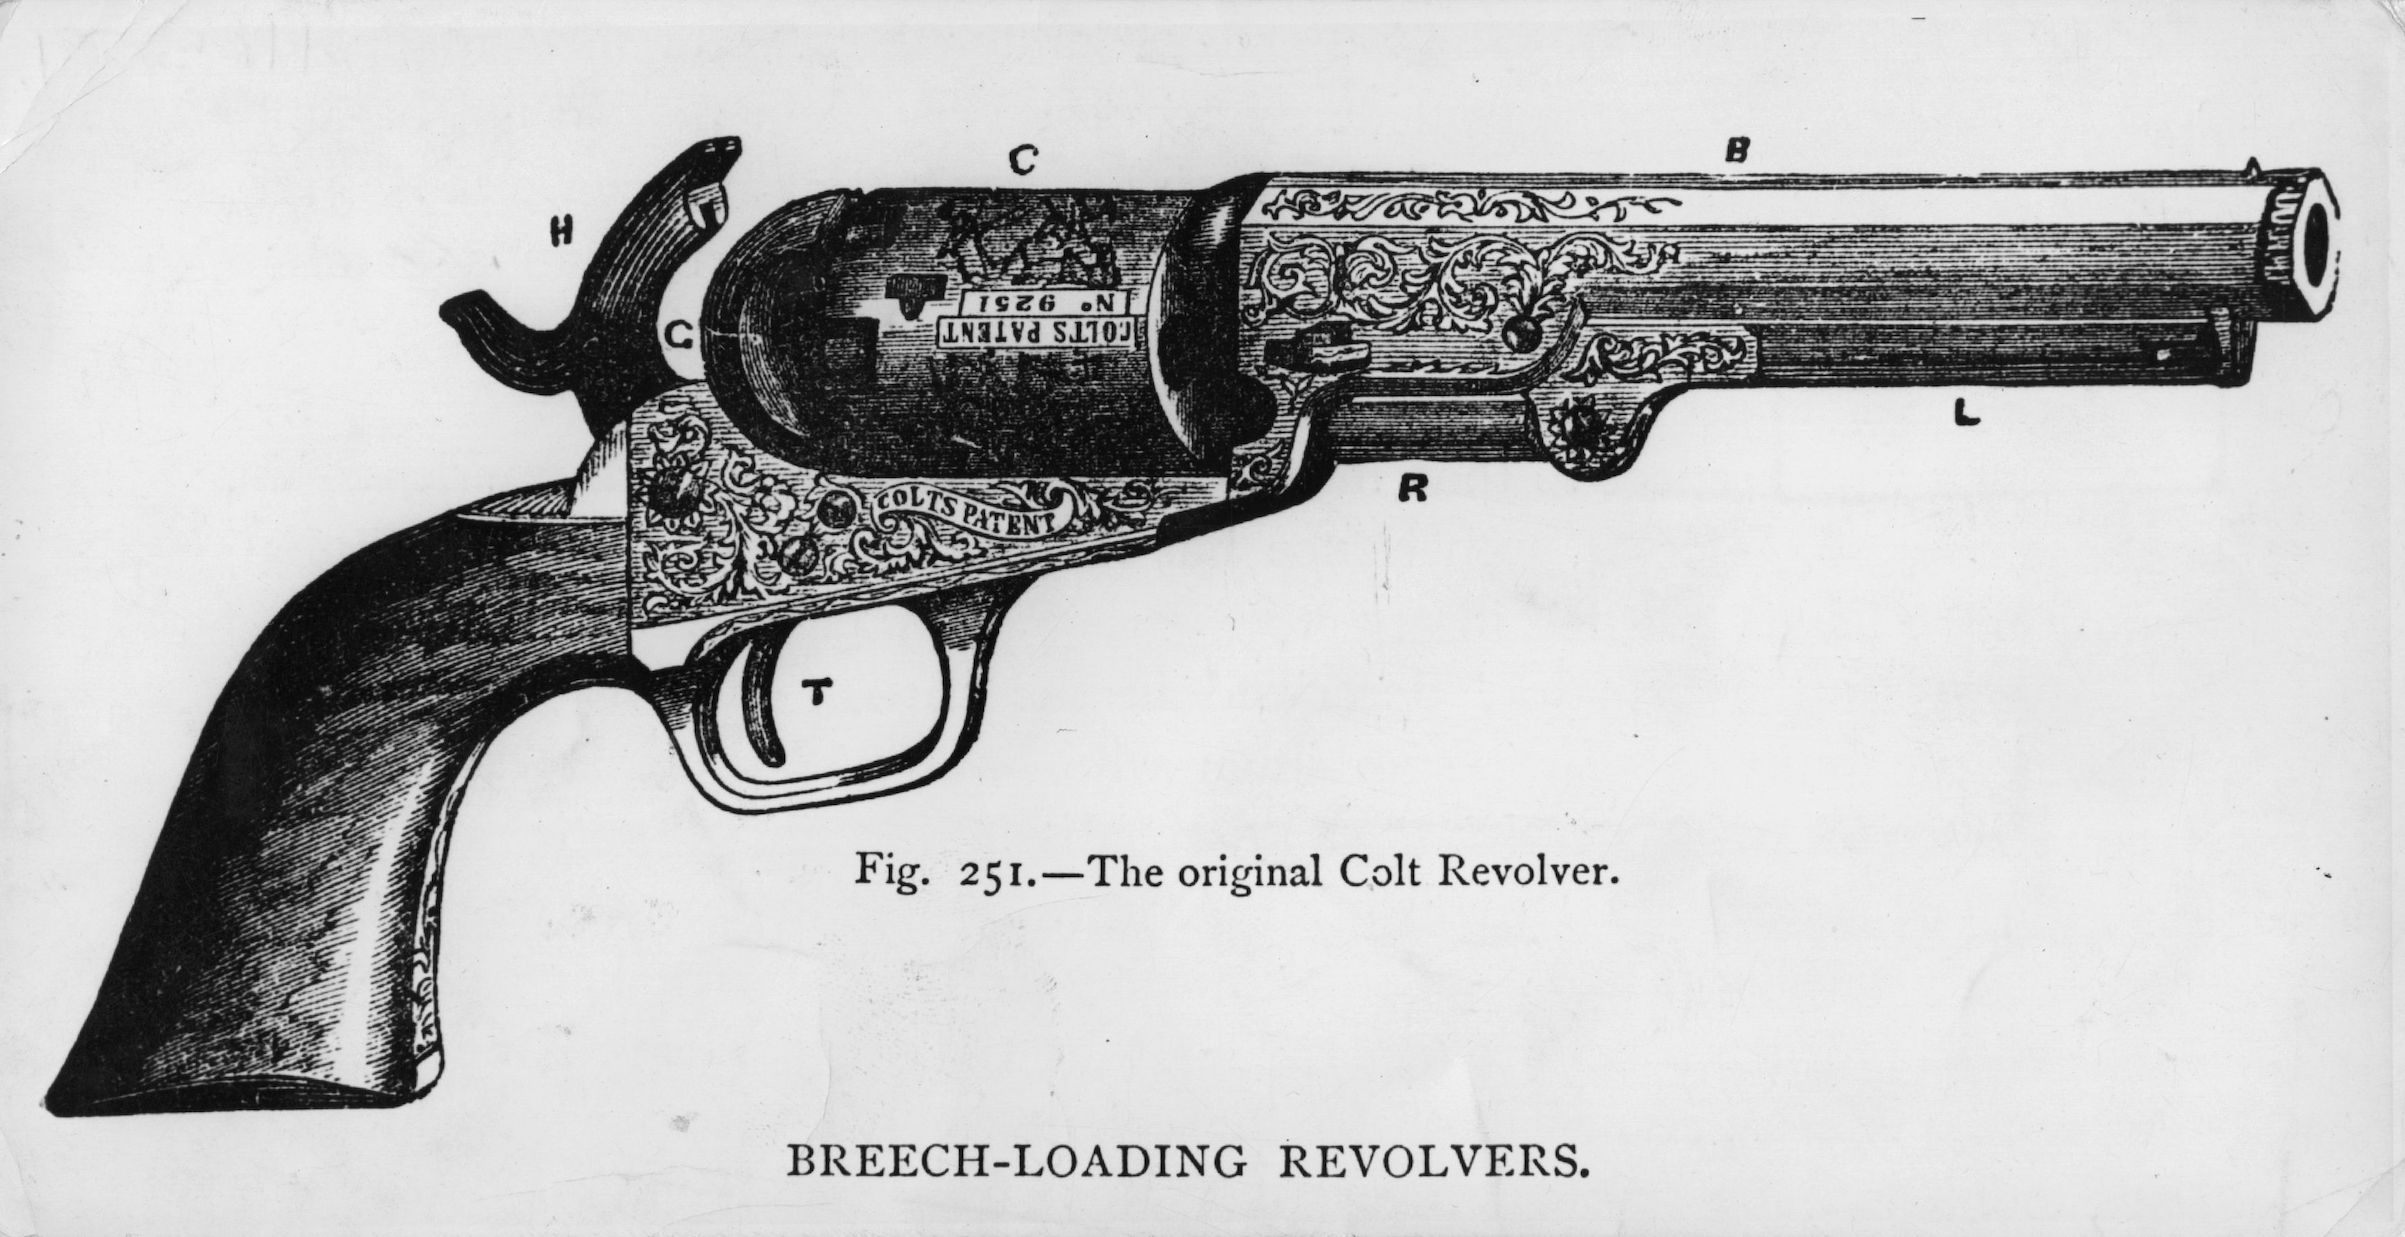 circa 1835:  The original Colt revolver, as patented by Colonel Samuel Colt. (Getty Images)